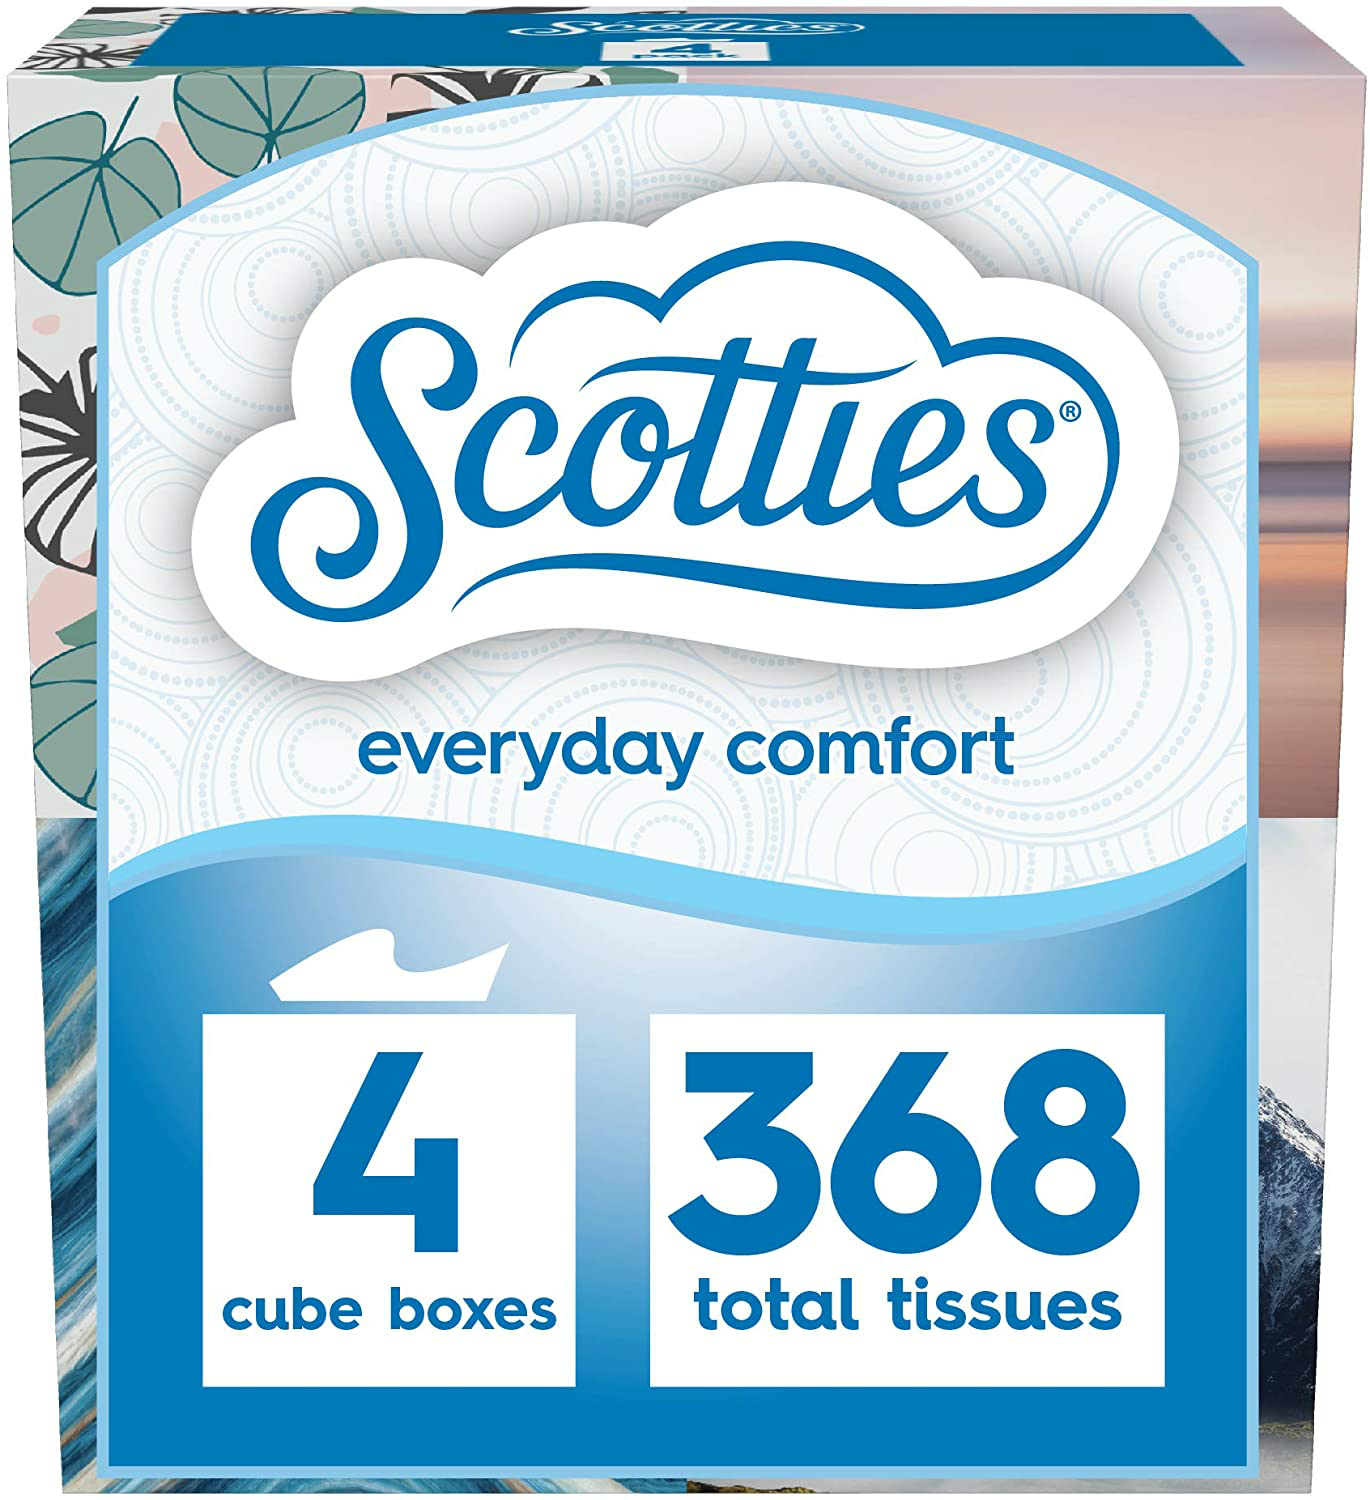 Scotties Everyday Comfort Facial Tissues, 92 Tissues per Box, 4 Pack, 92 Count (Pack of 4) $3.61